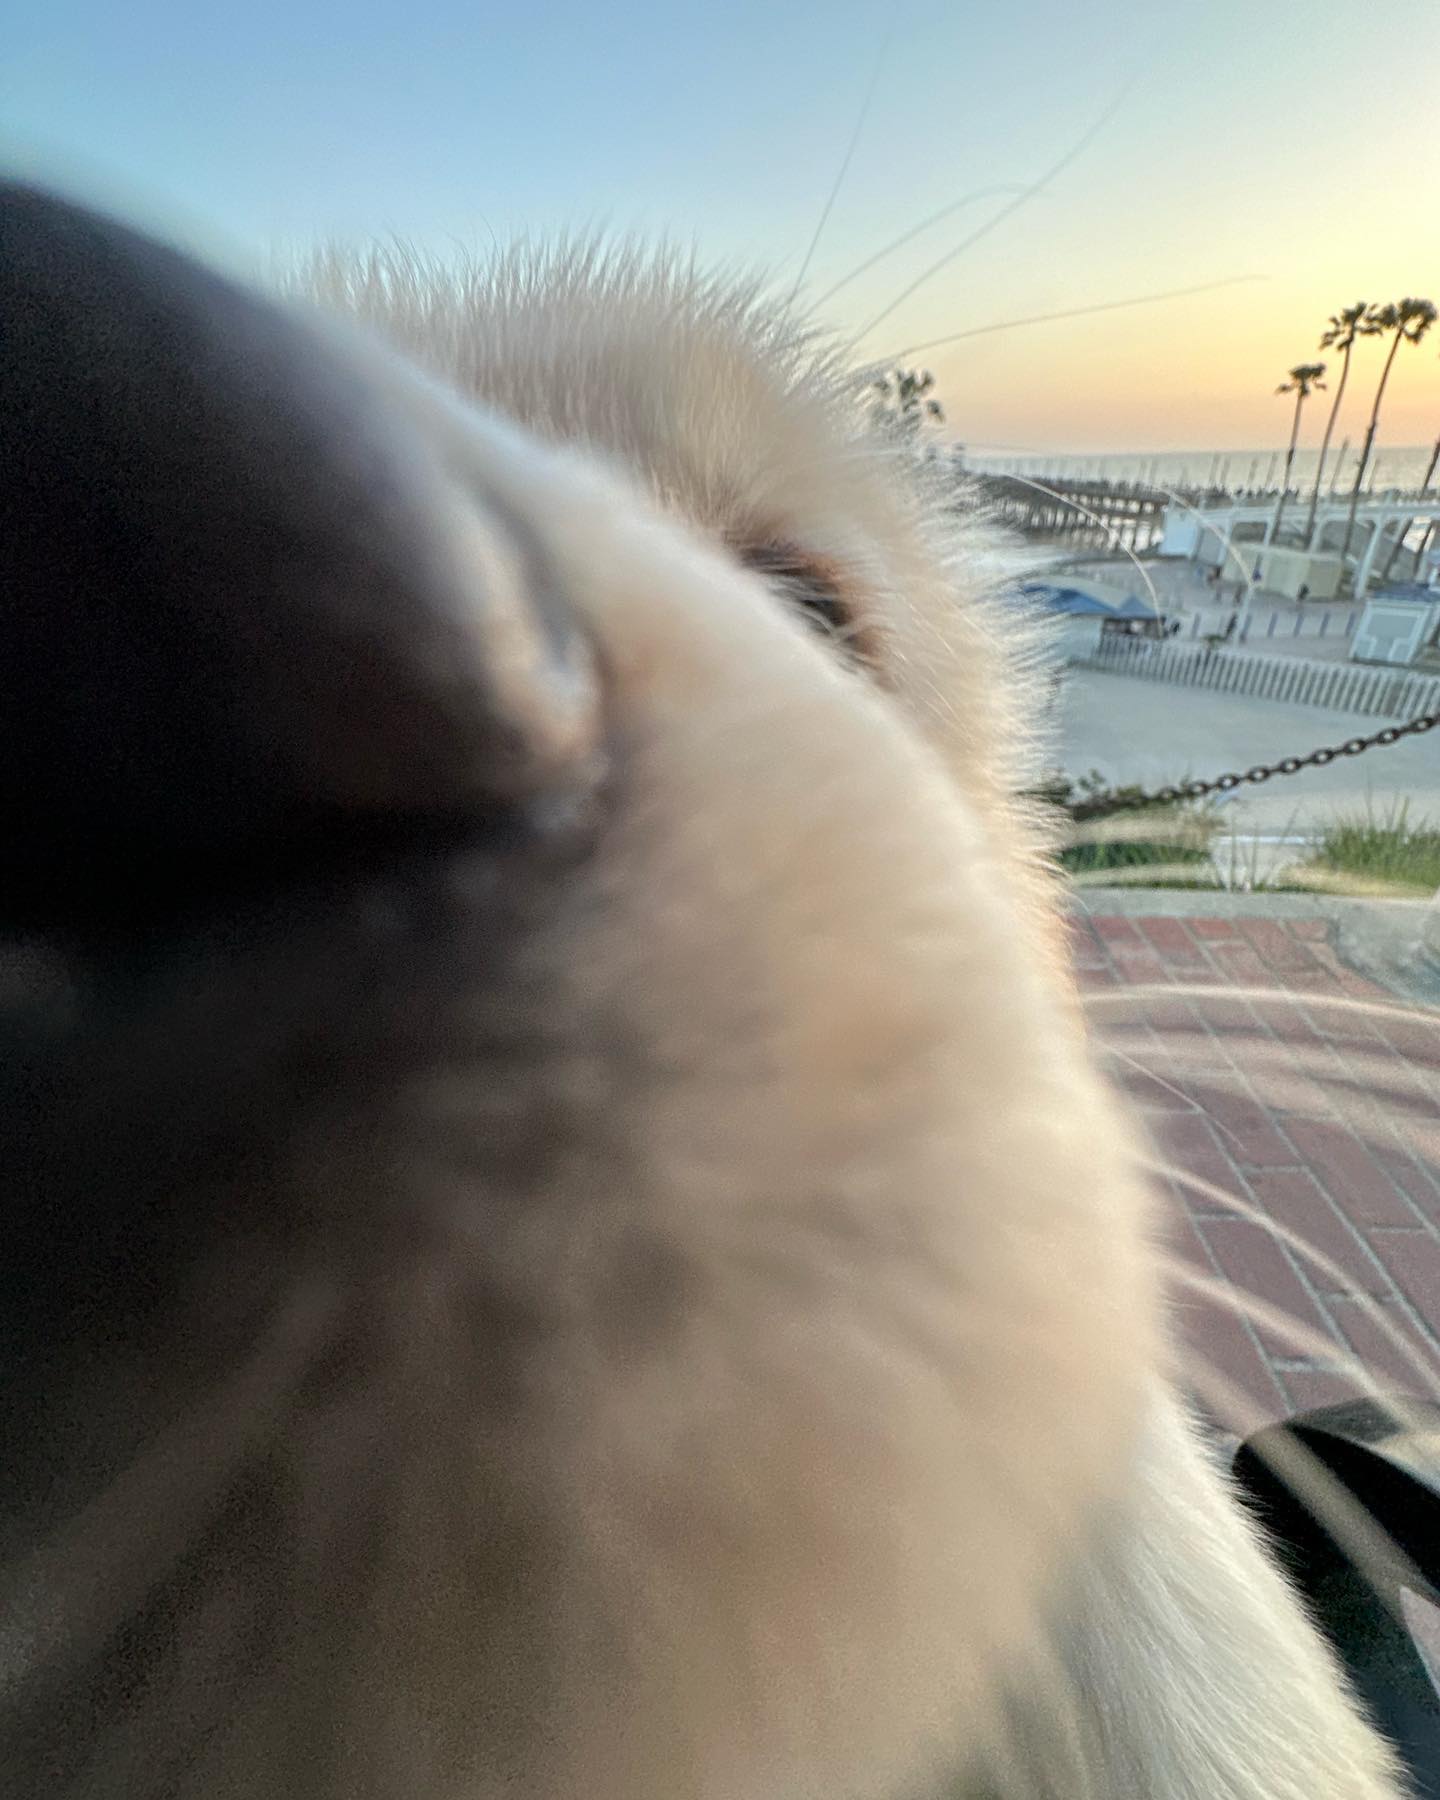 Dog snout extremely close to the camera with ocean view in the background.